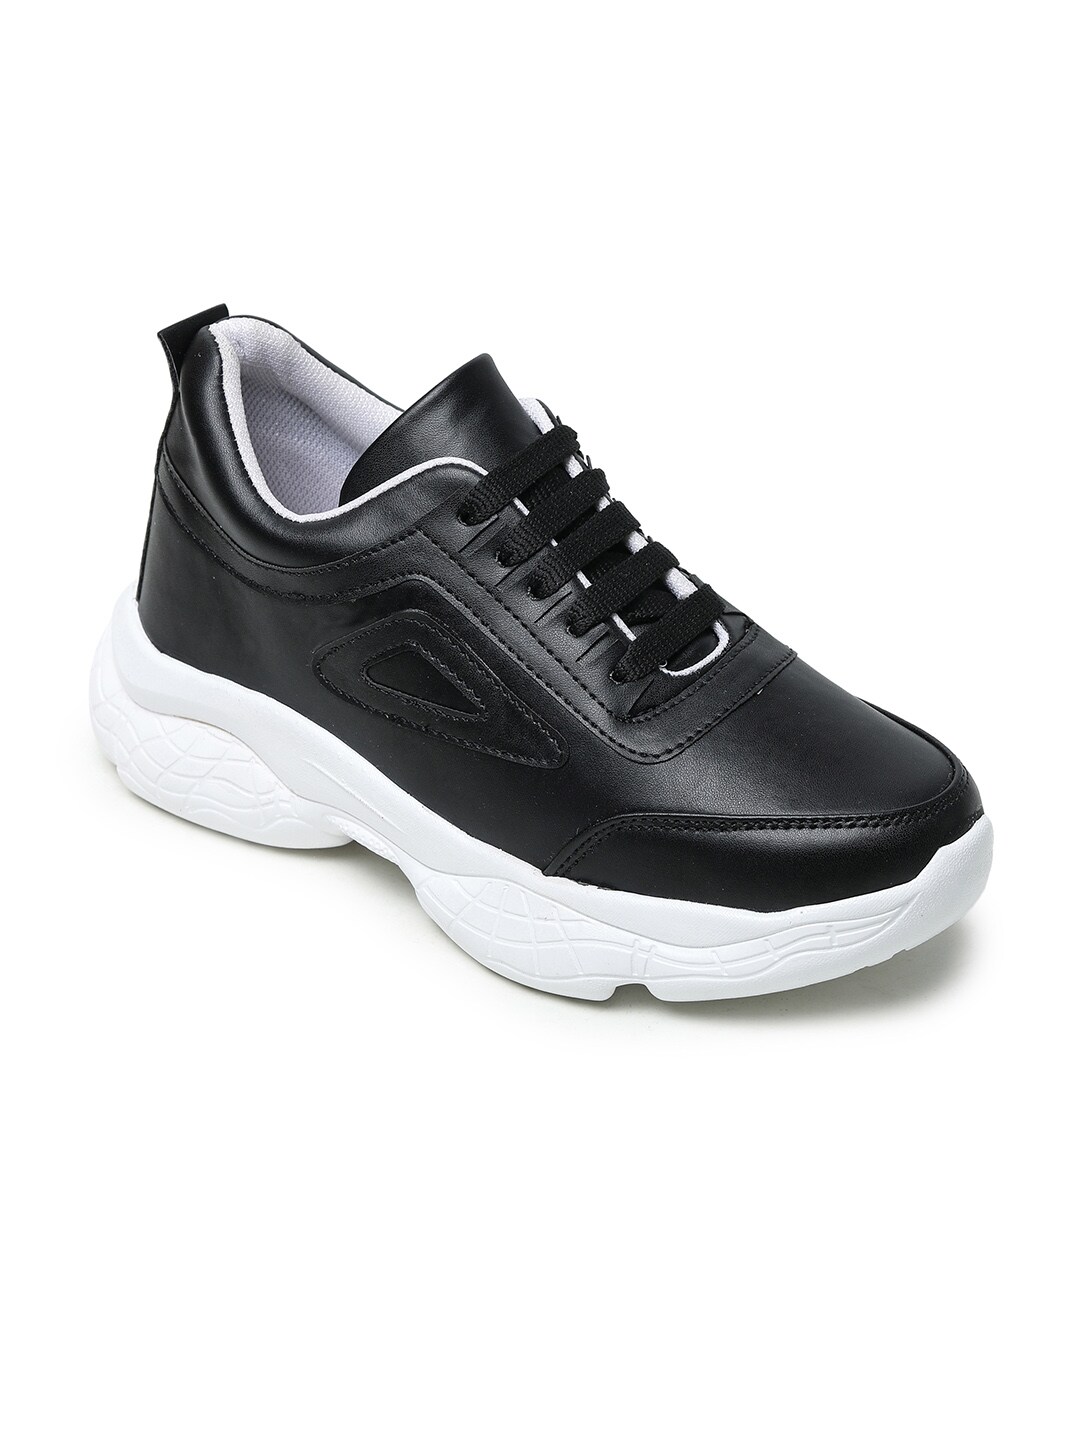 BOOTCO Women Black Solid Sneakers with Stich Details Price in India